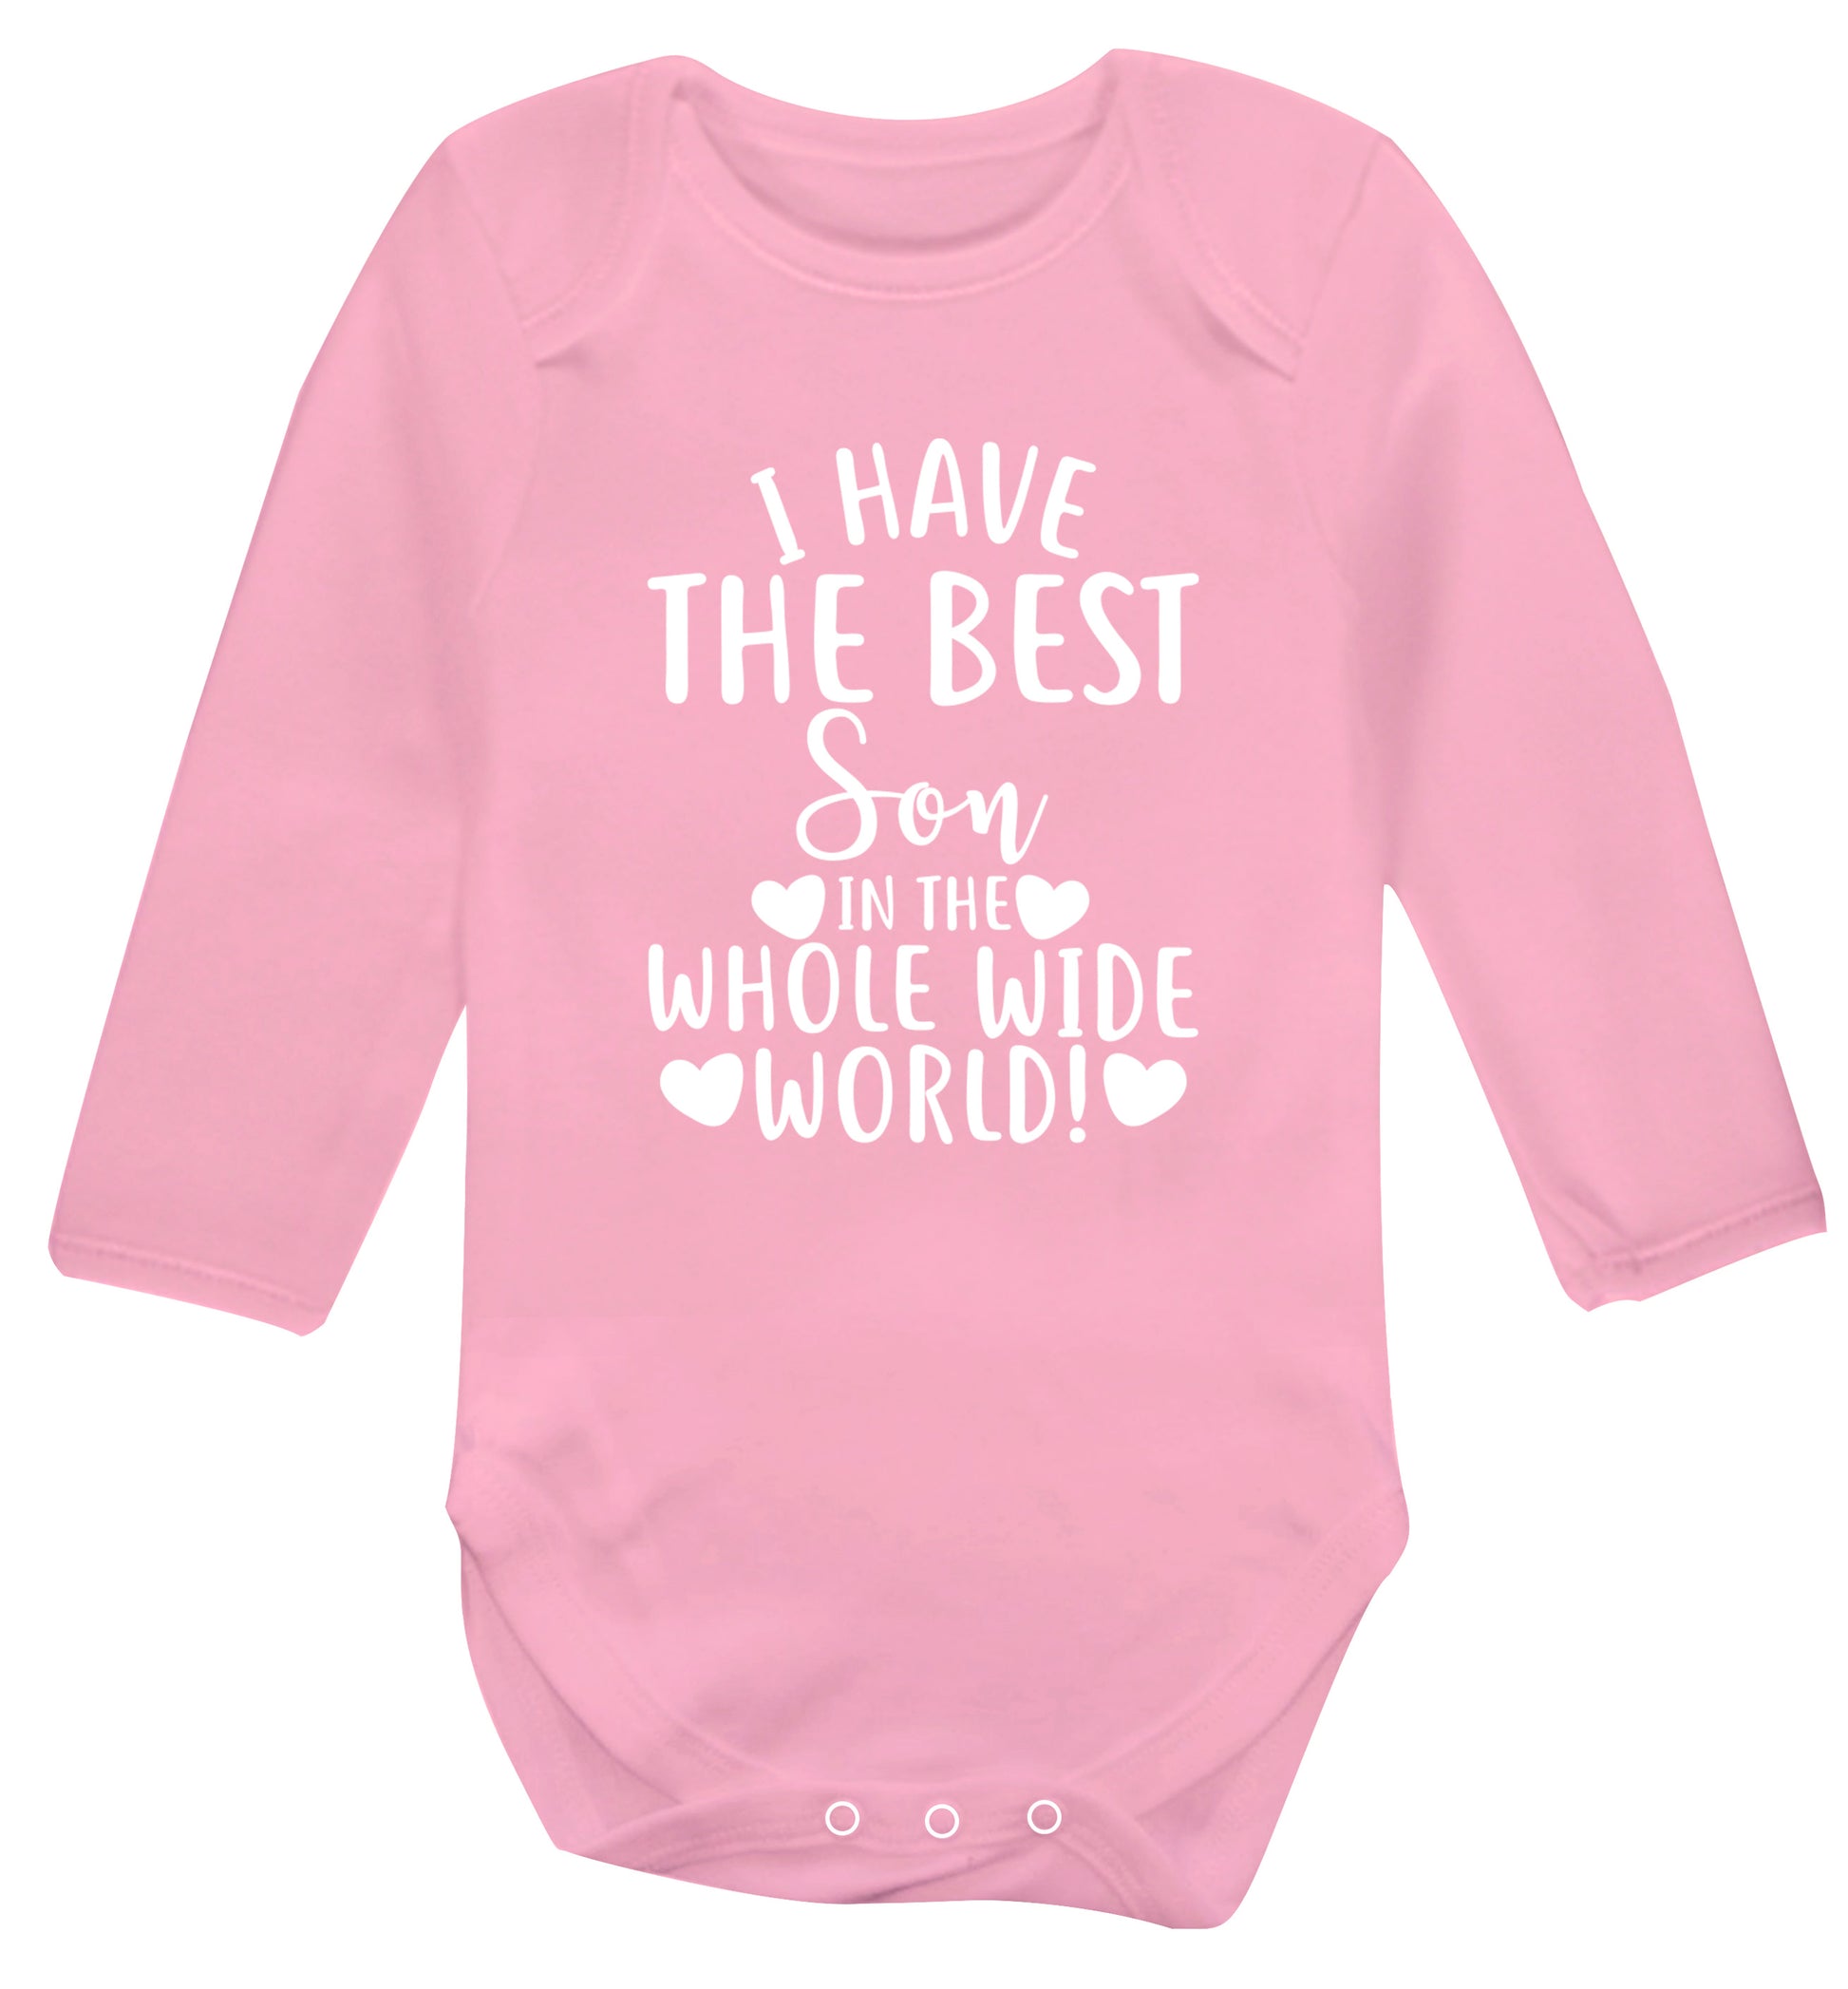 I have the best son in the whole wide world! Baby Vest long sleeved pale pink 6-12 months